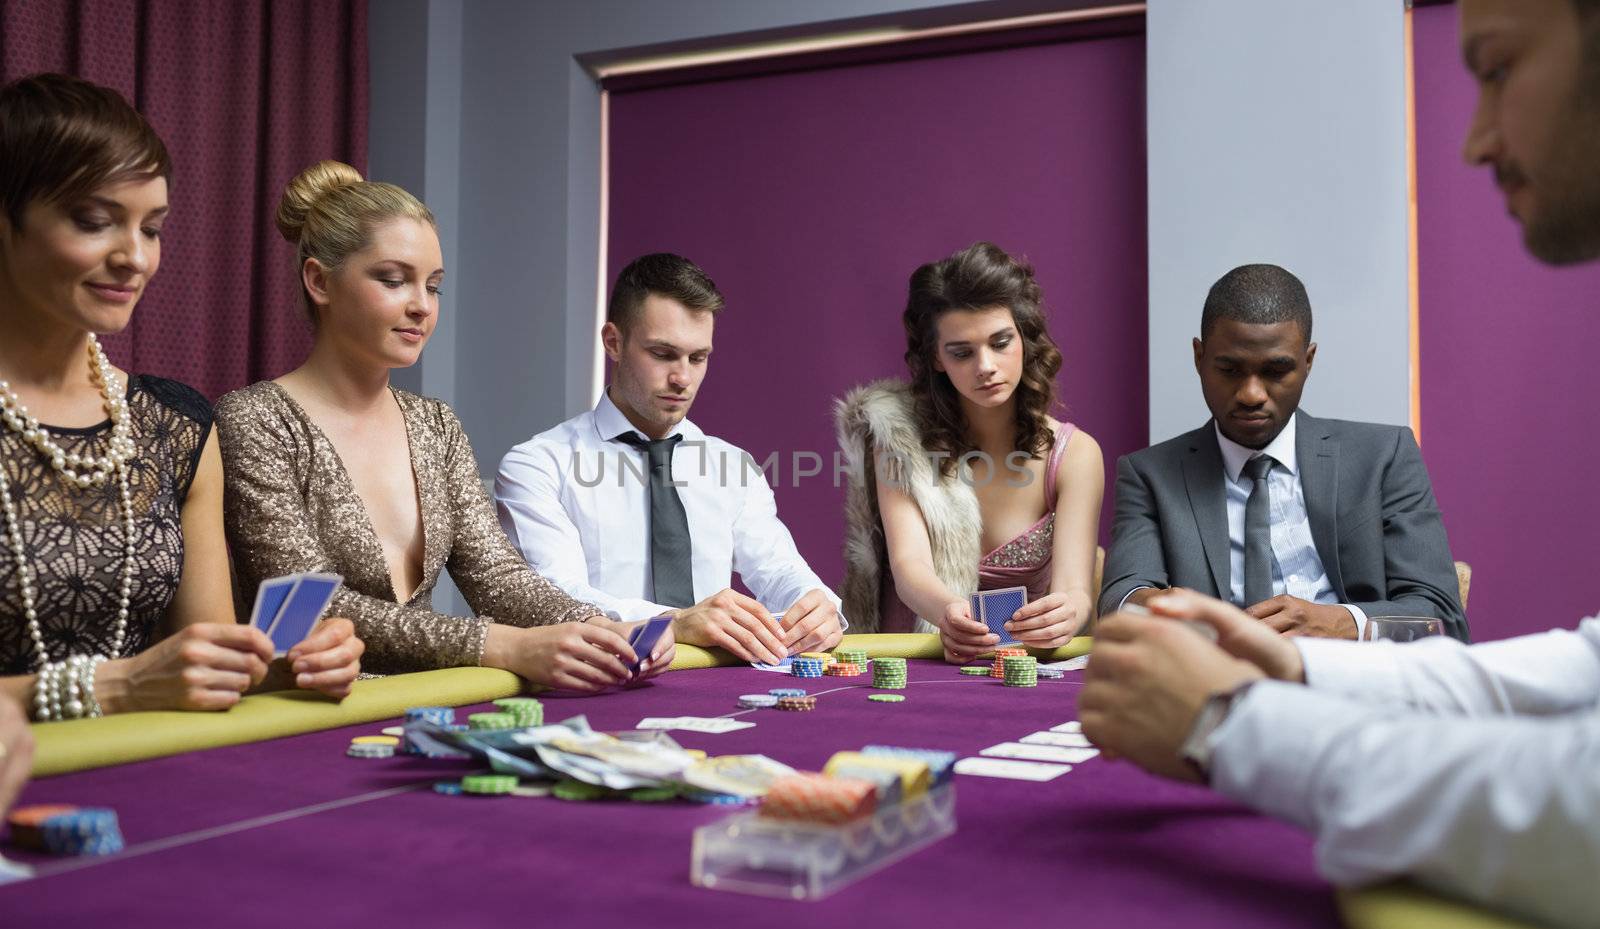 People at the poker table in casino